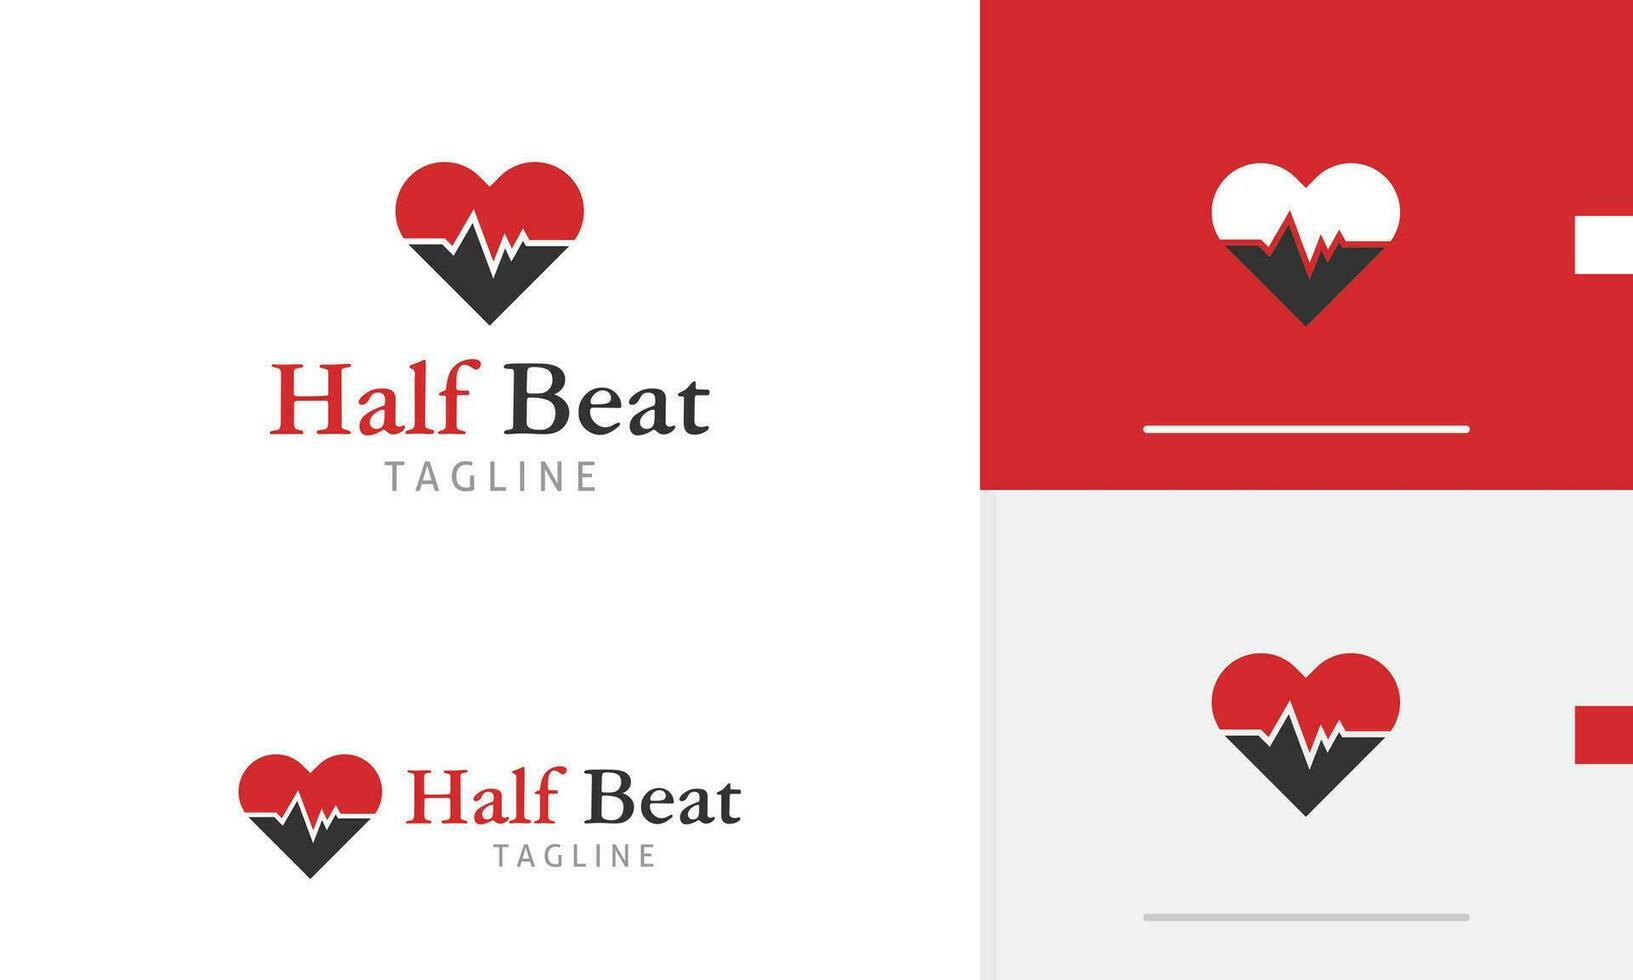 Logo design icon of heart love shape with pulse beat outline for hospital health monitor diagnose vector